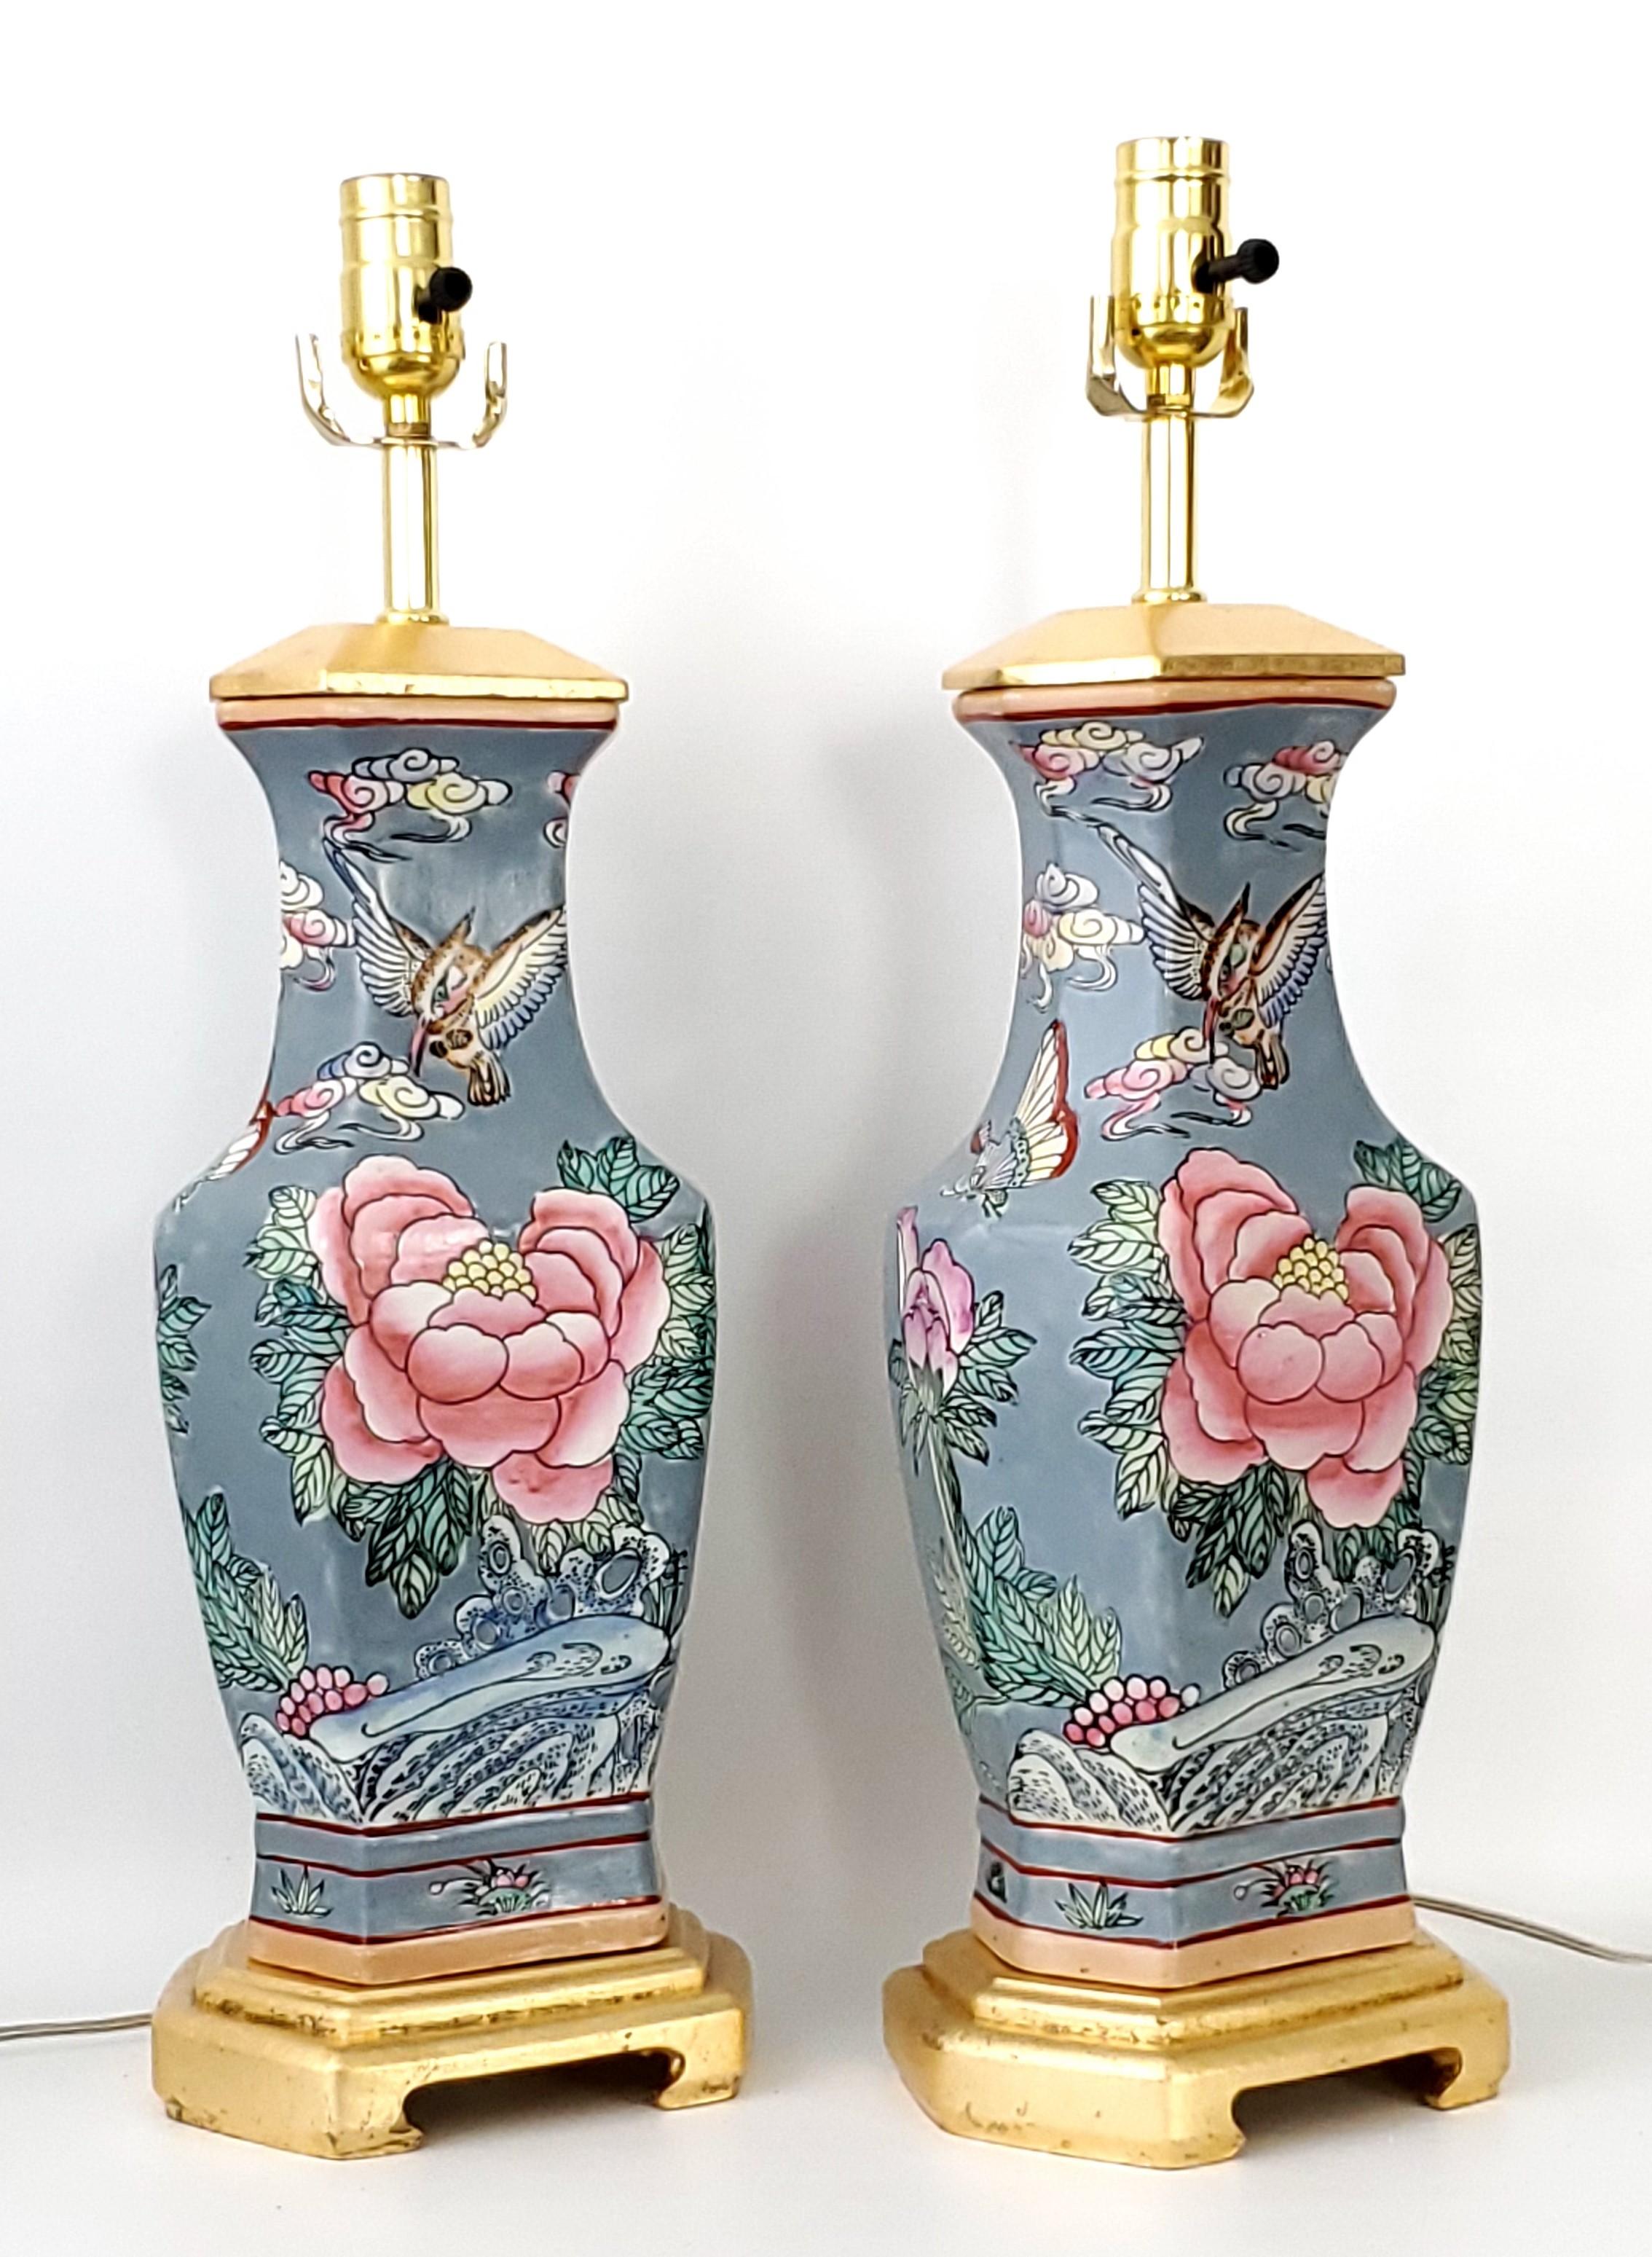 20th Century Pair of Vintage Chinese Porcelain Ceramic Table Lamps with Pink Lamp Shades For Sale